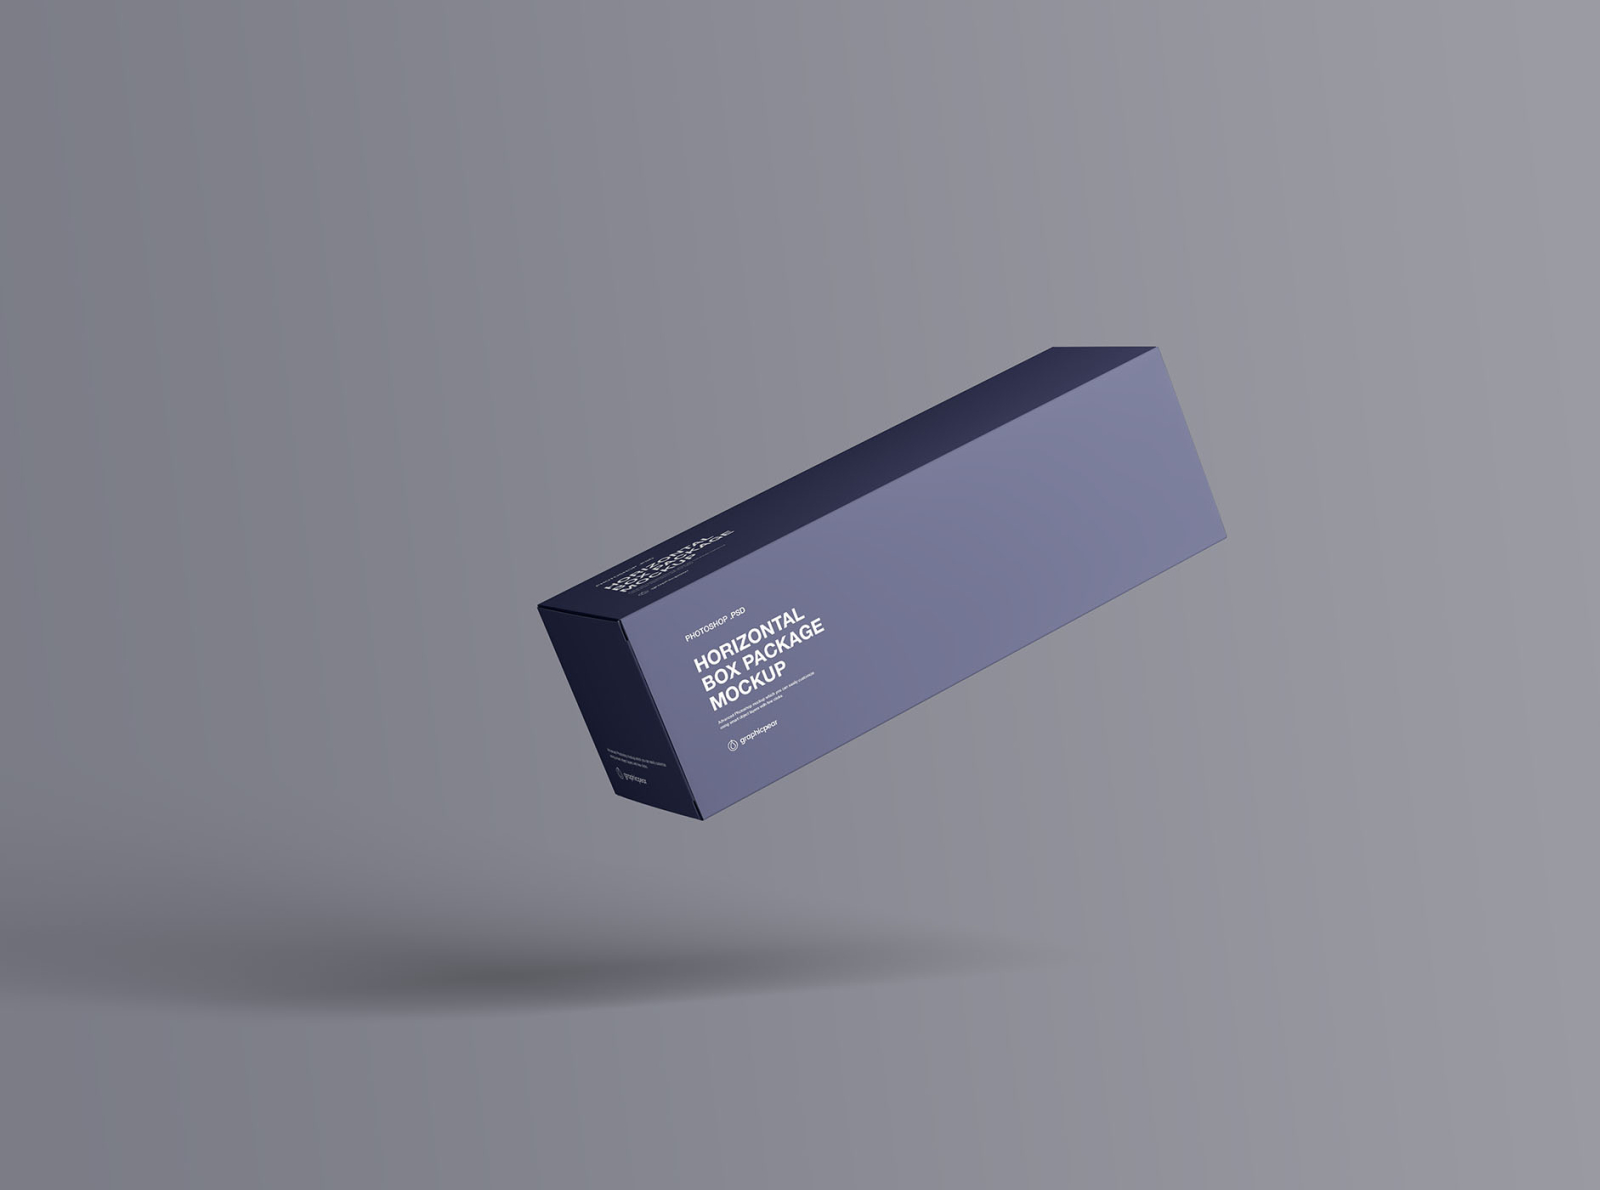 Horizontal Package Box Mockup by Graphic Pear on Dribbble